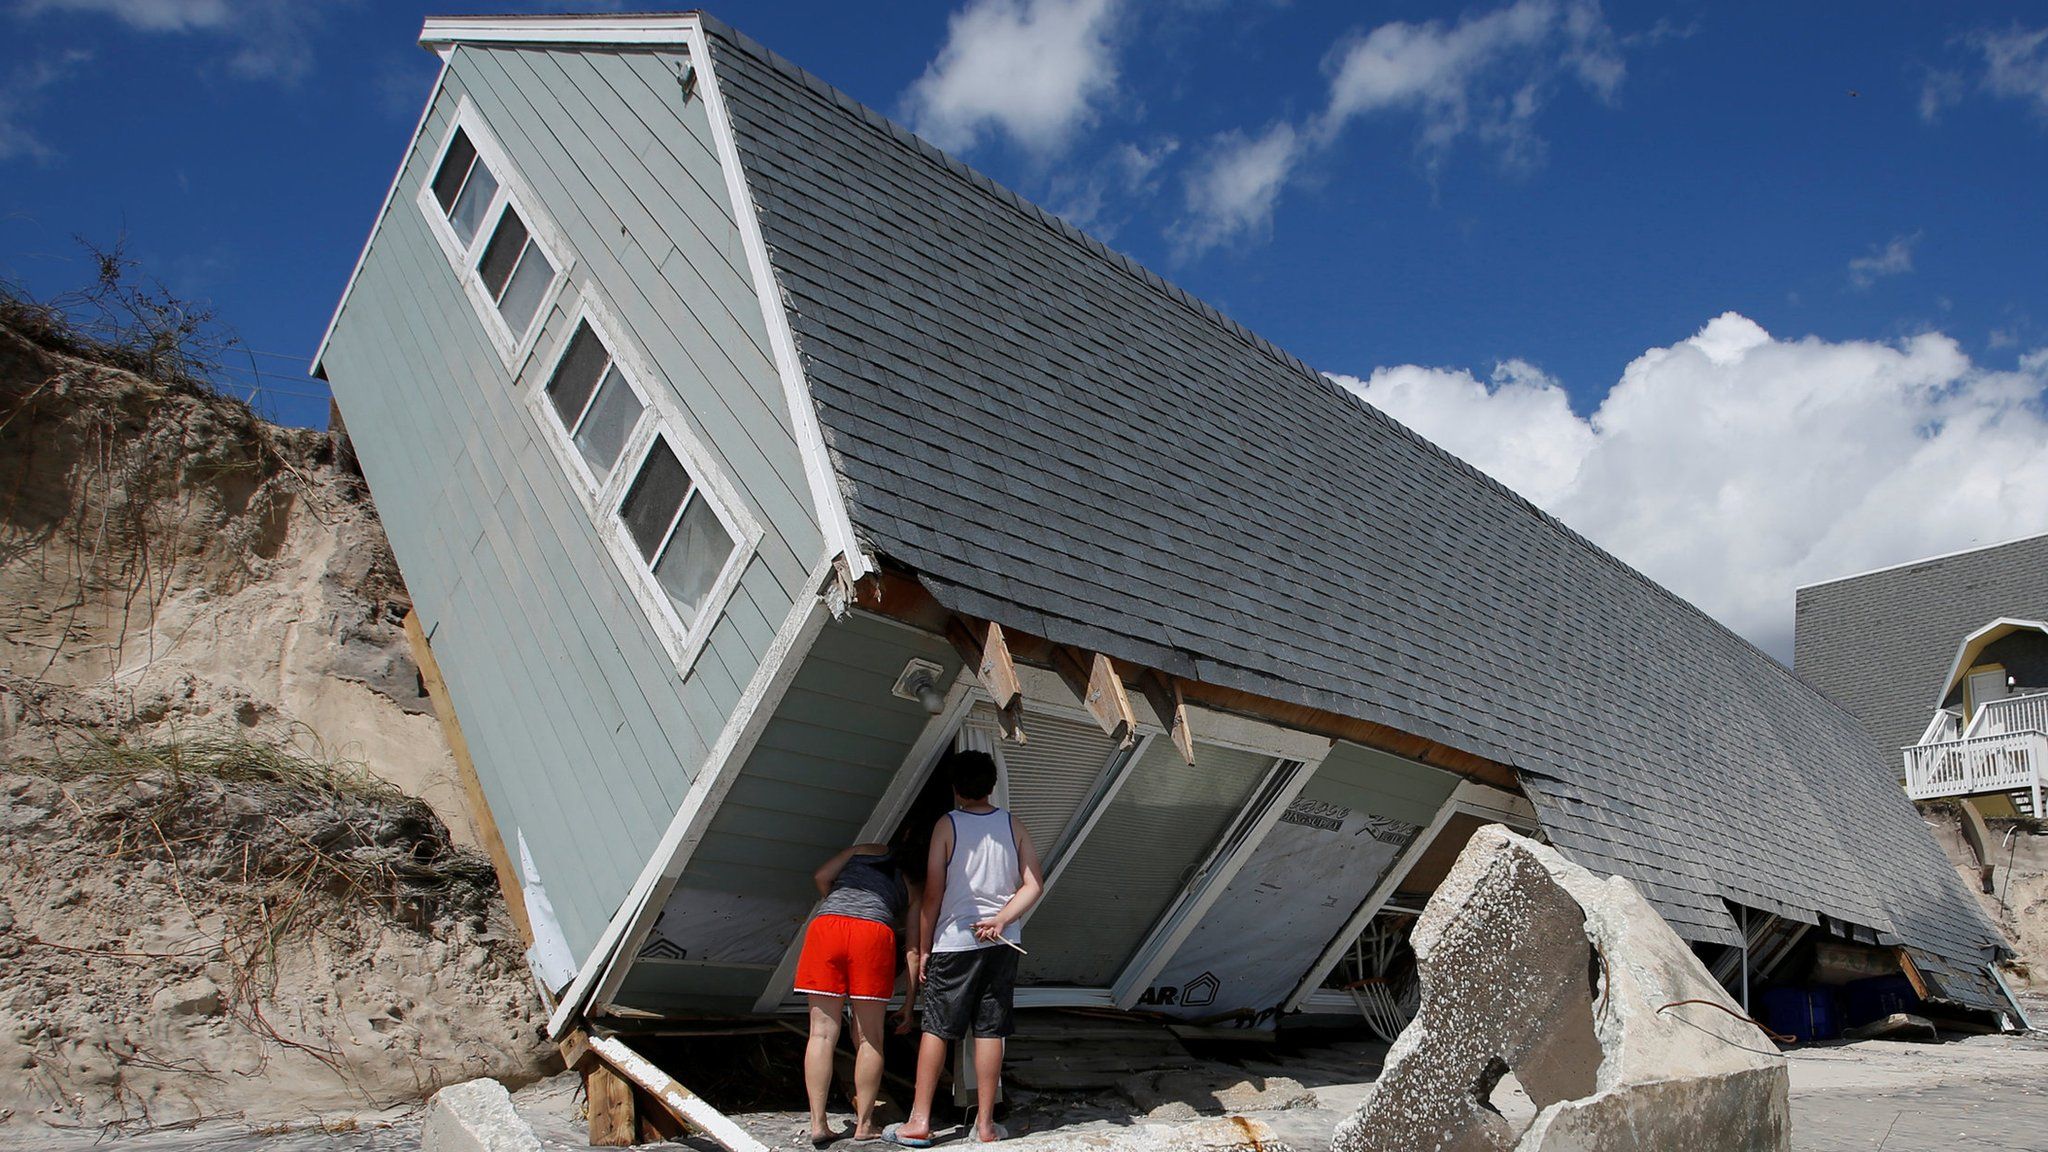 Local residents look inside a collapsed coastal house after Hurricane Irma passed the area in Vilano Beach, Florida